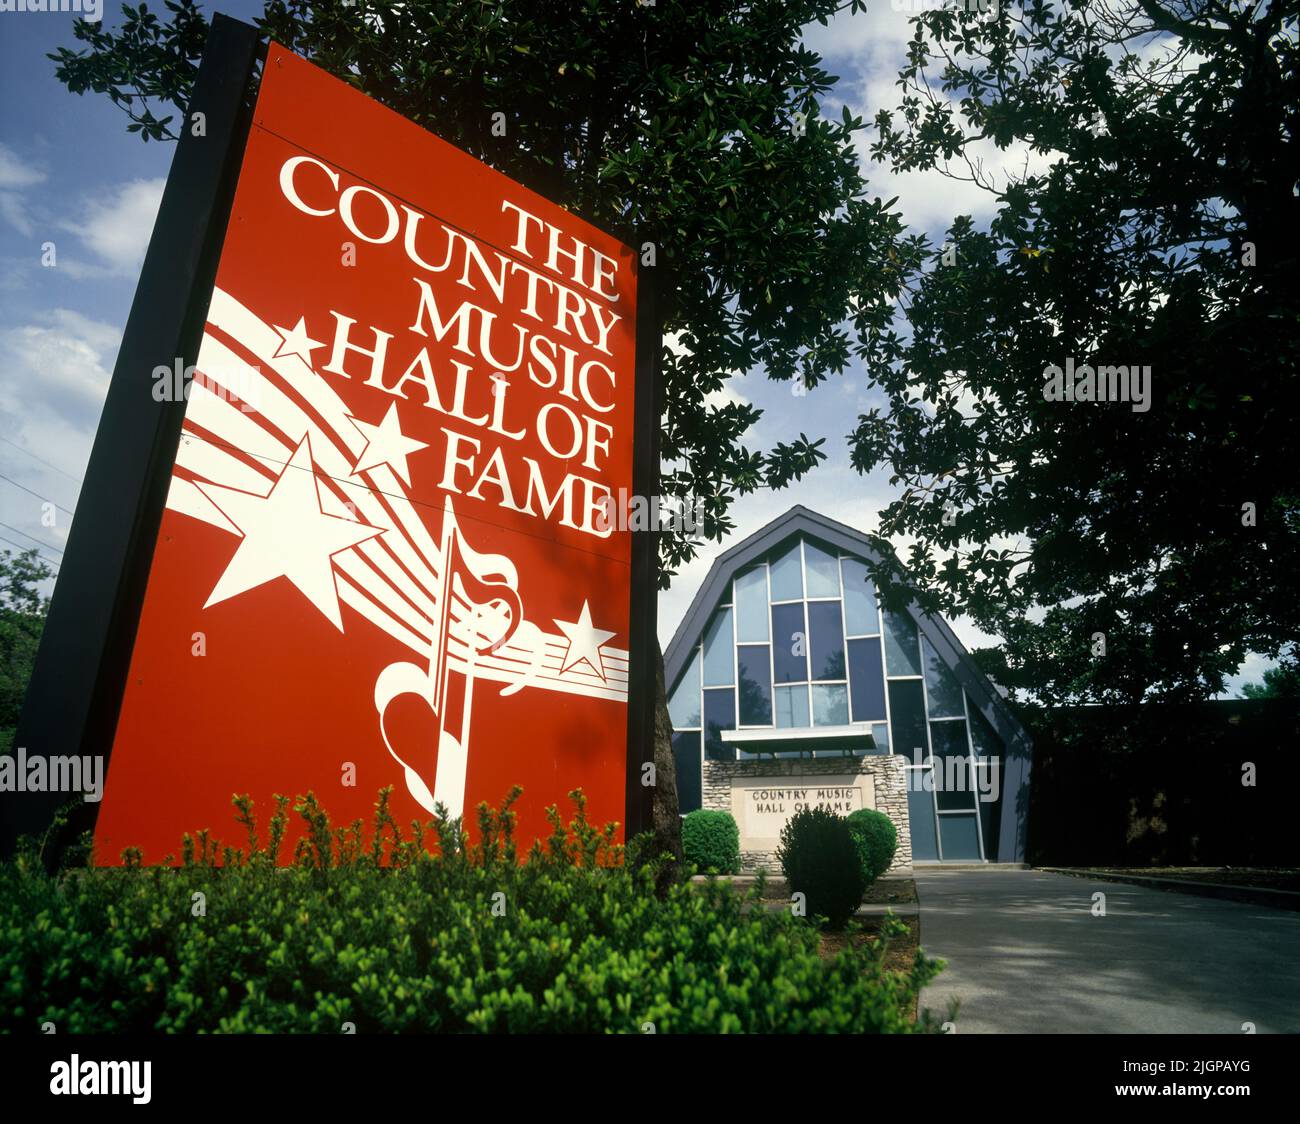 1992 HISTORICAL COUNTRY MUSIC HALL OF FAME MUSIC SQUARE NASHVILLE TENNESSEE USA Stock Photo